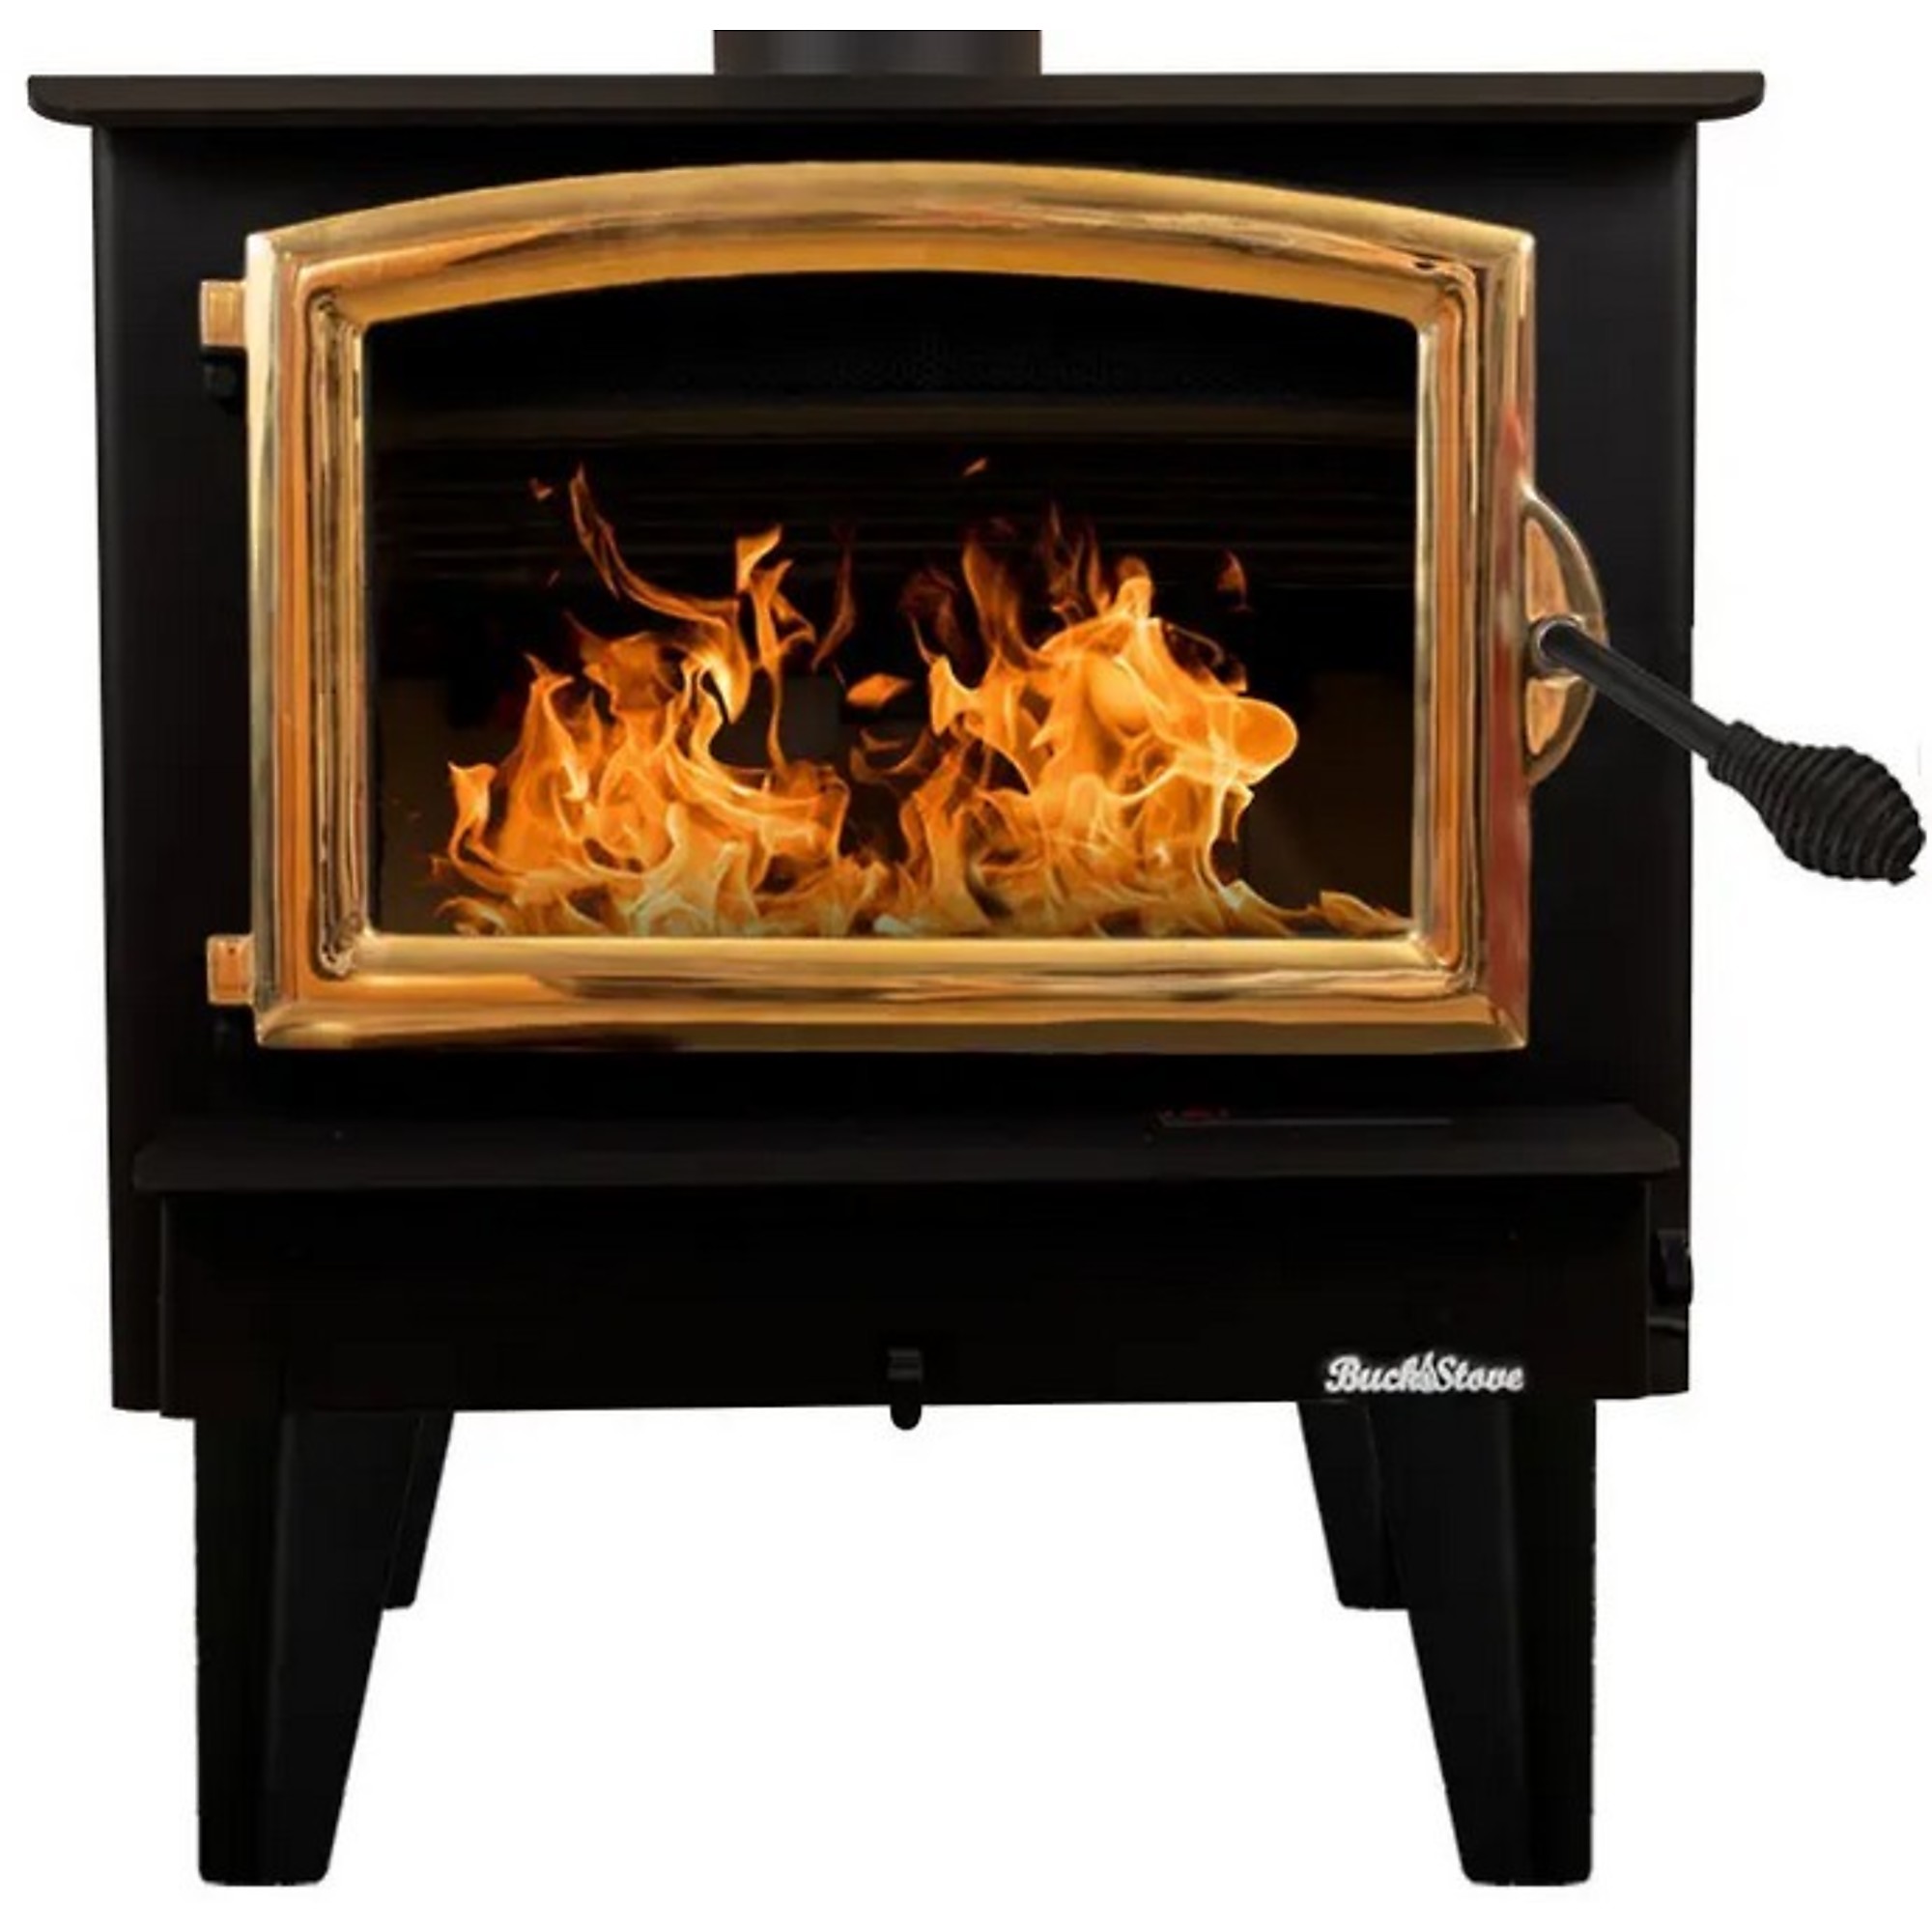 Buck, Wood Stove with Gold Door and Blower, Heat Output 52400 Btu/hour, Heating Capability 2600 ftÂ², Model FP 74GSLL